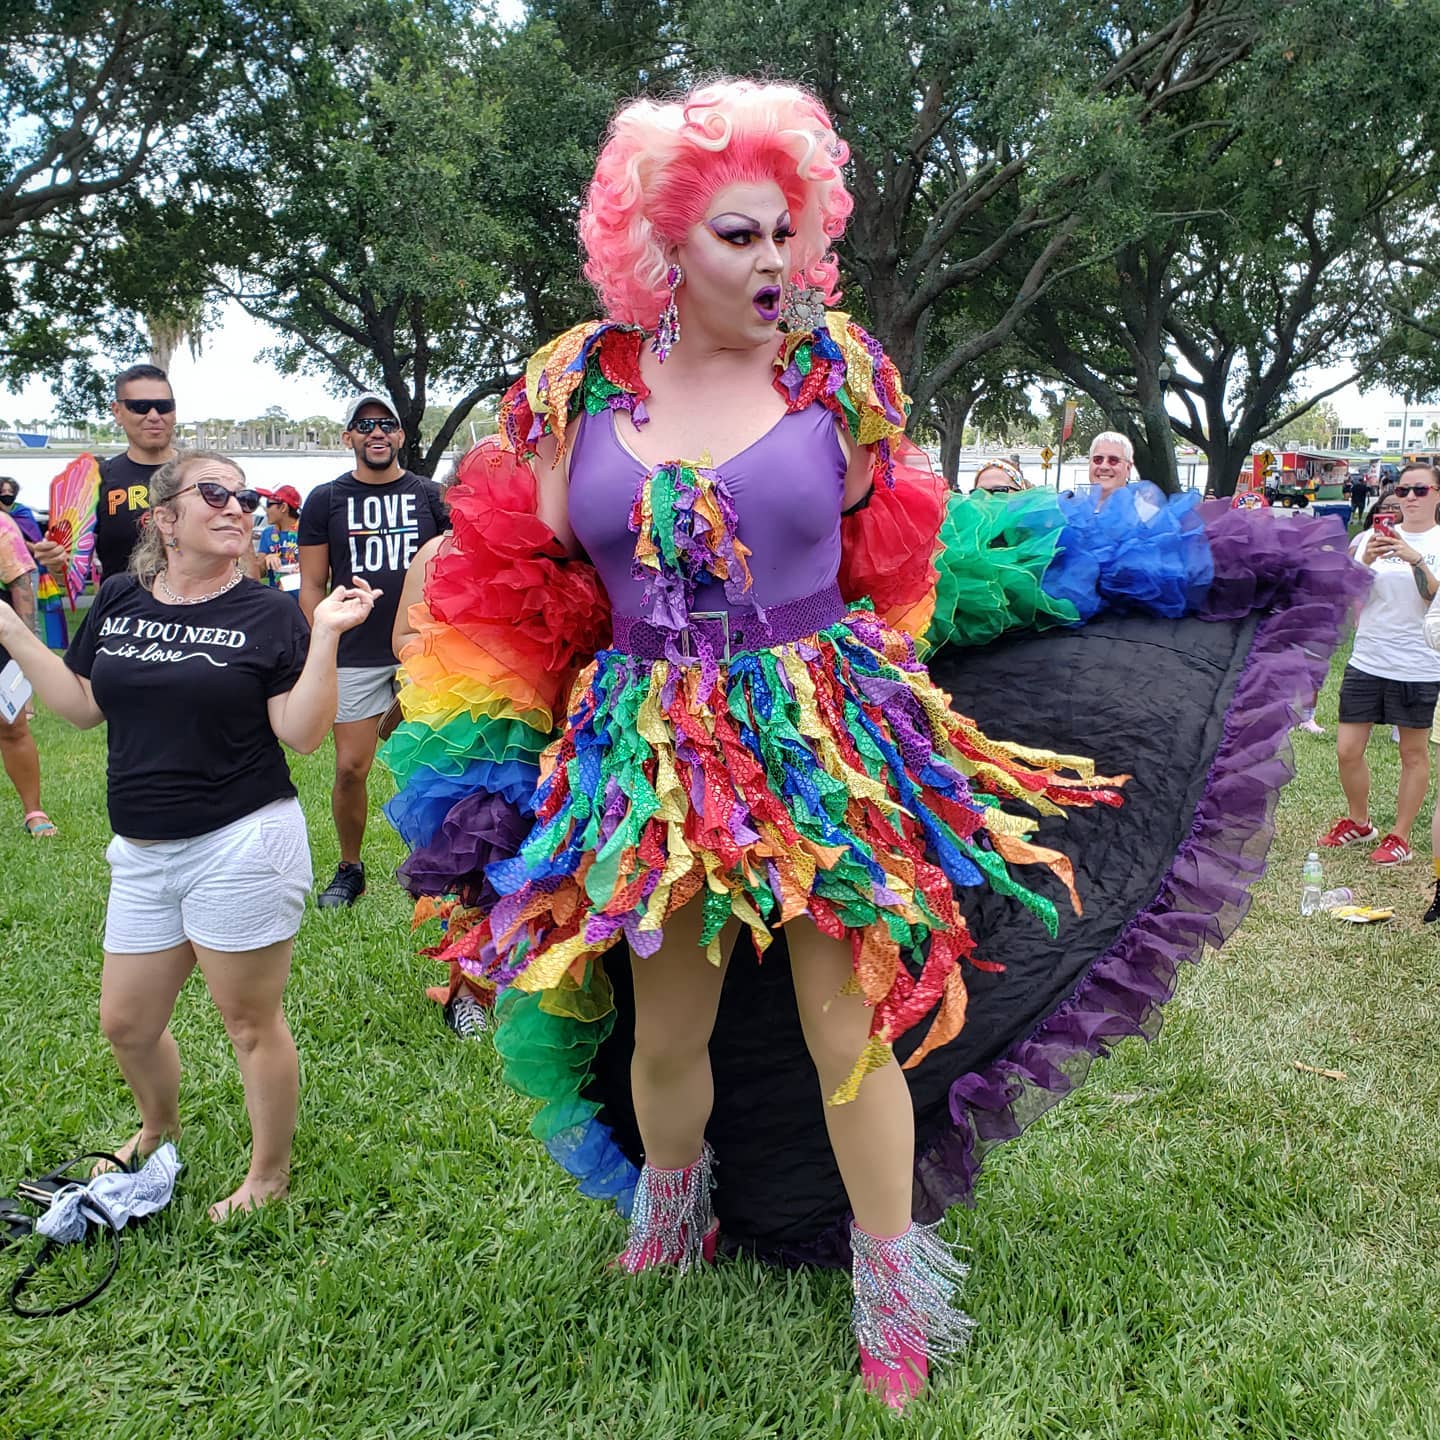 Pink Haired Performer with Rainbow Dress at Pride Parade. Photo by Instagram user @stpetepride